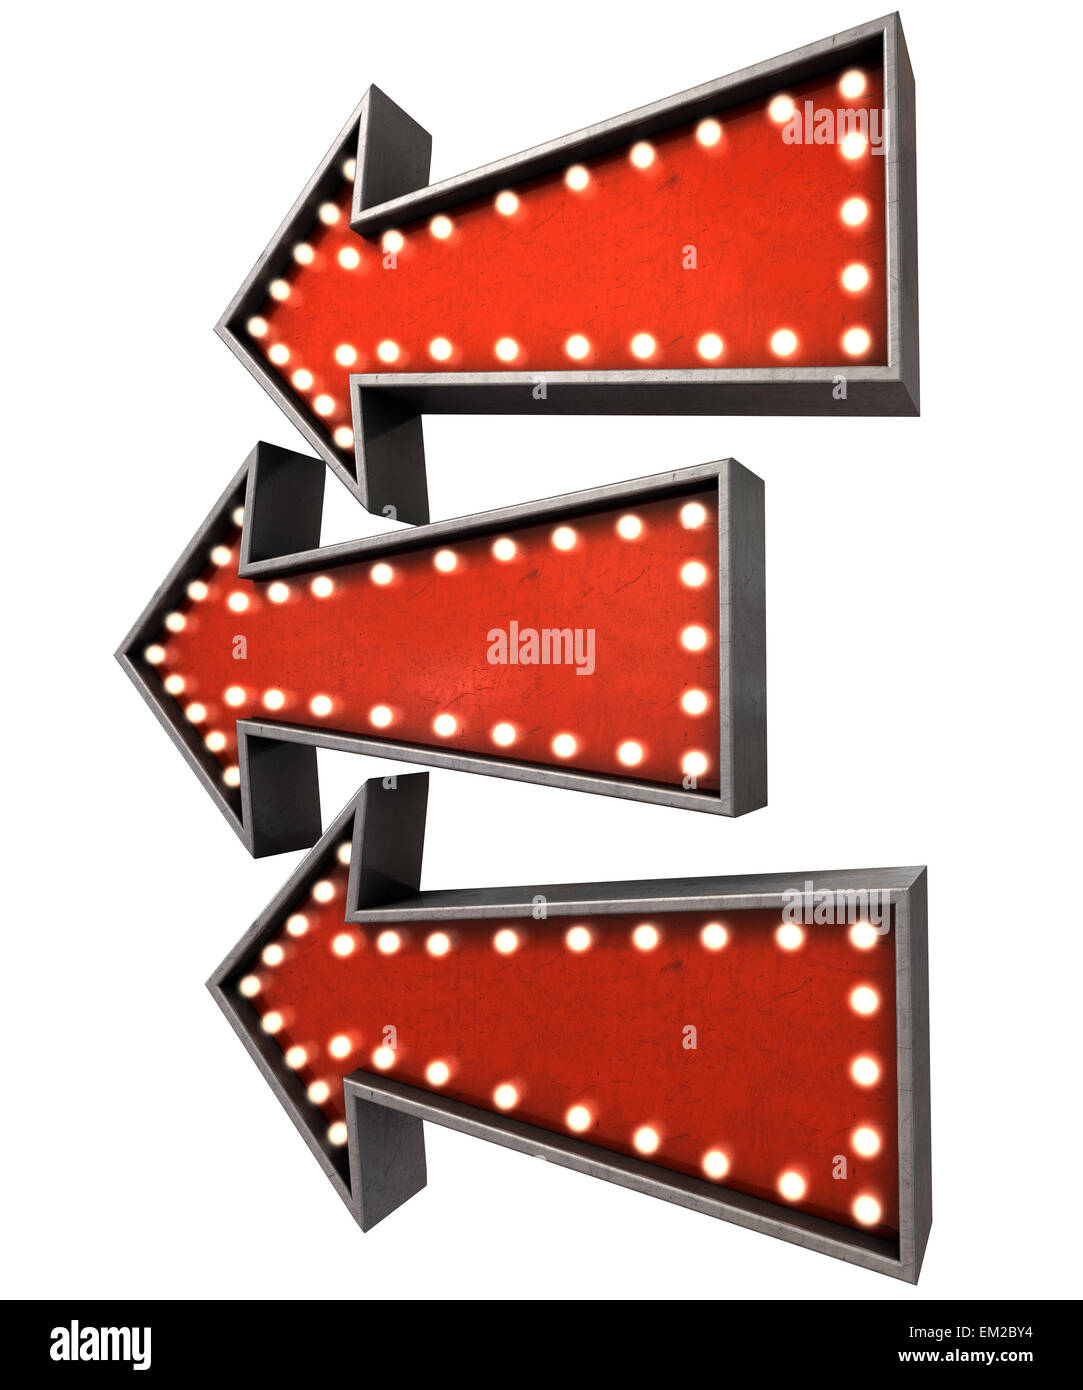 A collection of 3 belle epoque era red vintage arrow signs lit by lightbulbs facing the same direction on an isolated dark backg Stock Photo